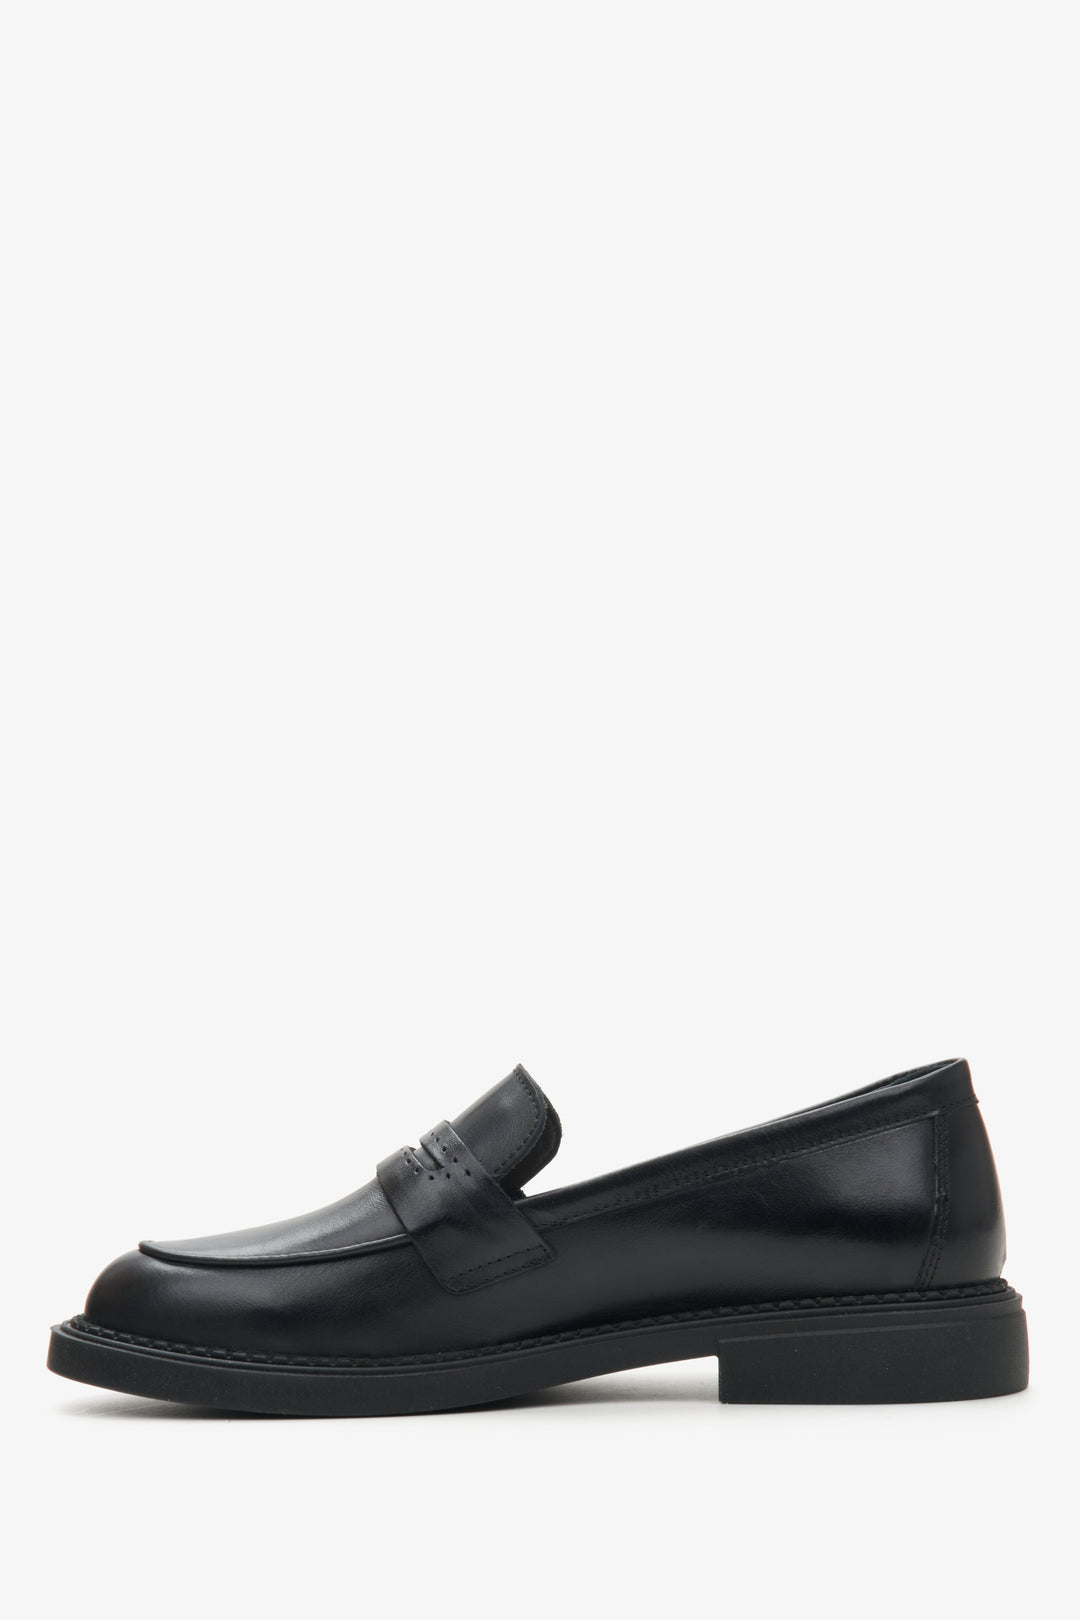 Estro women's black loafers made of genuine leather - side profile of the shoe.